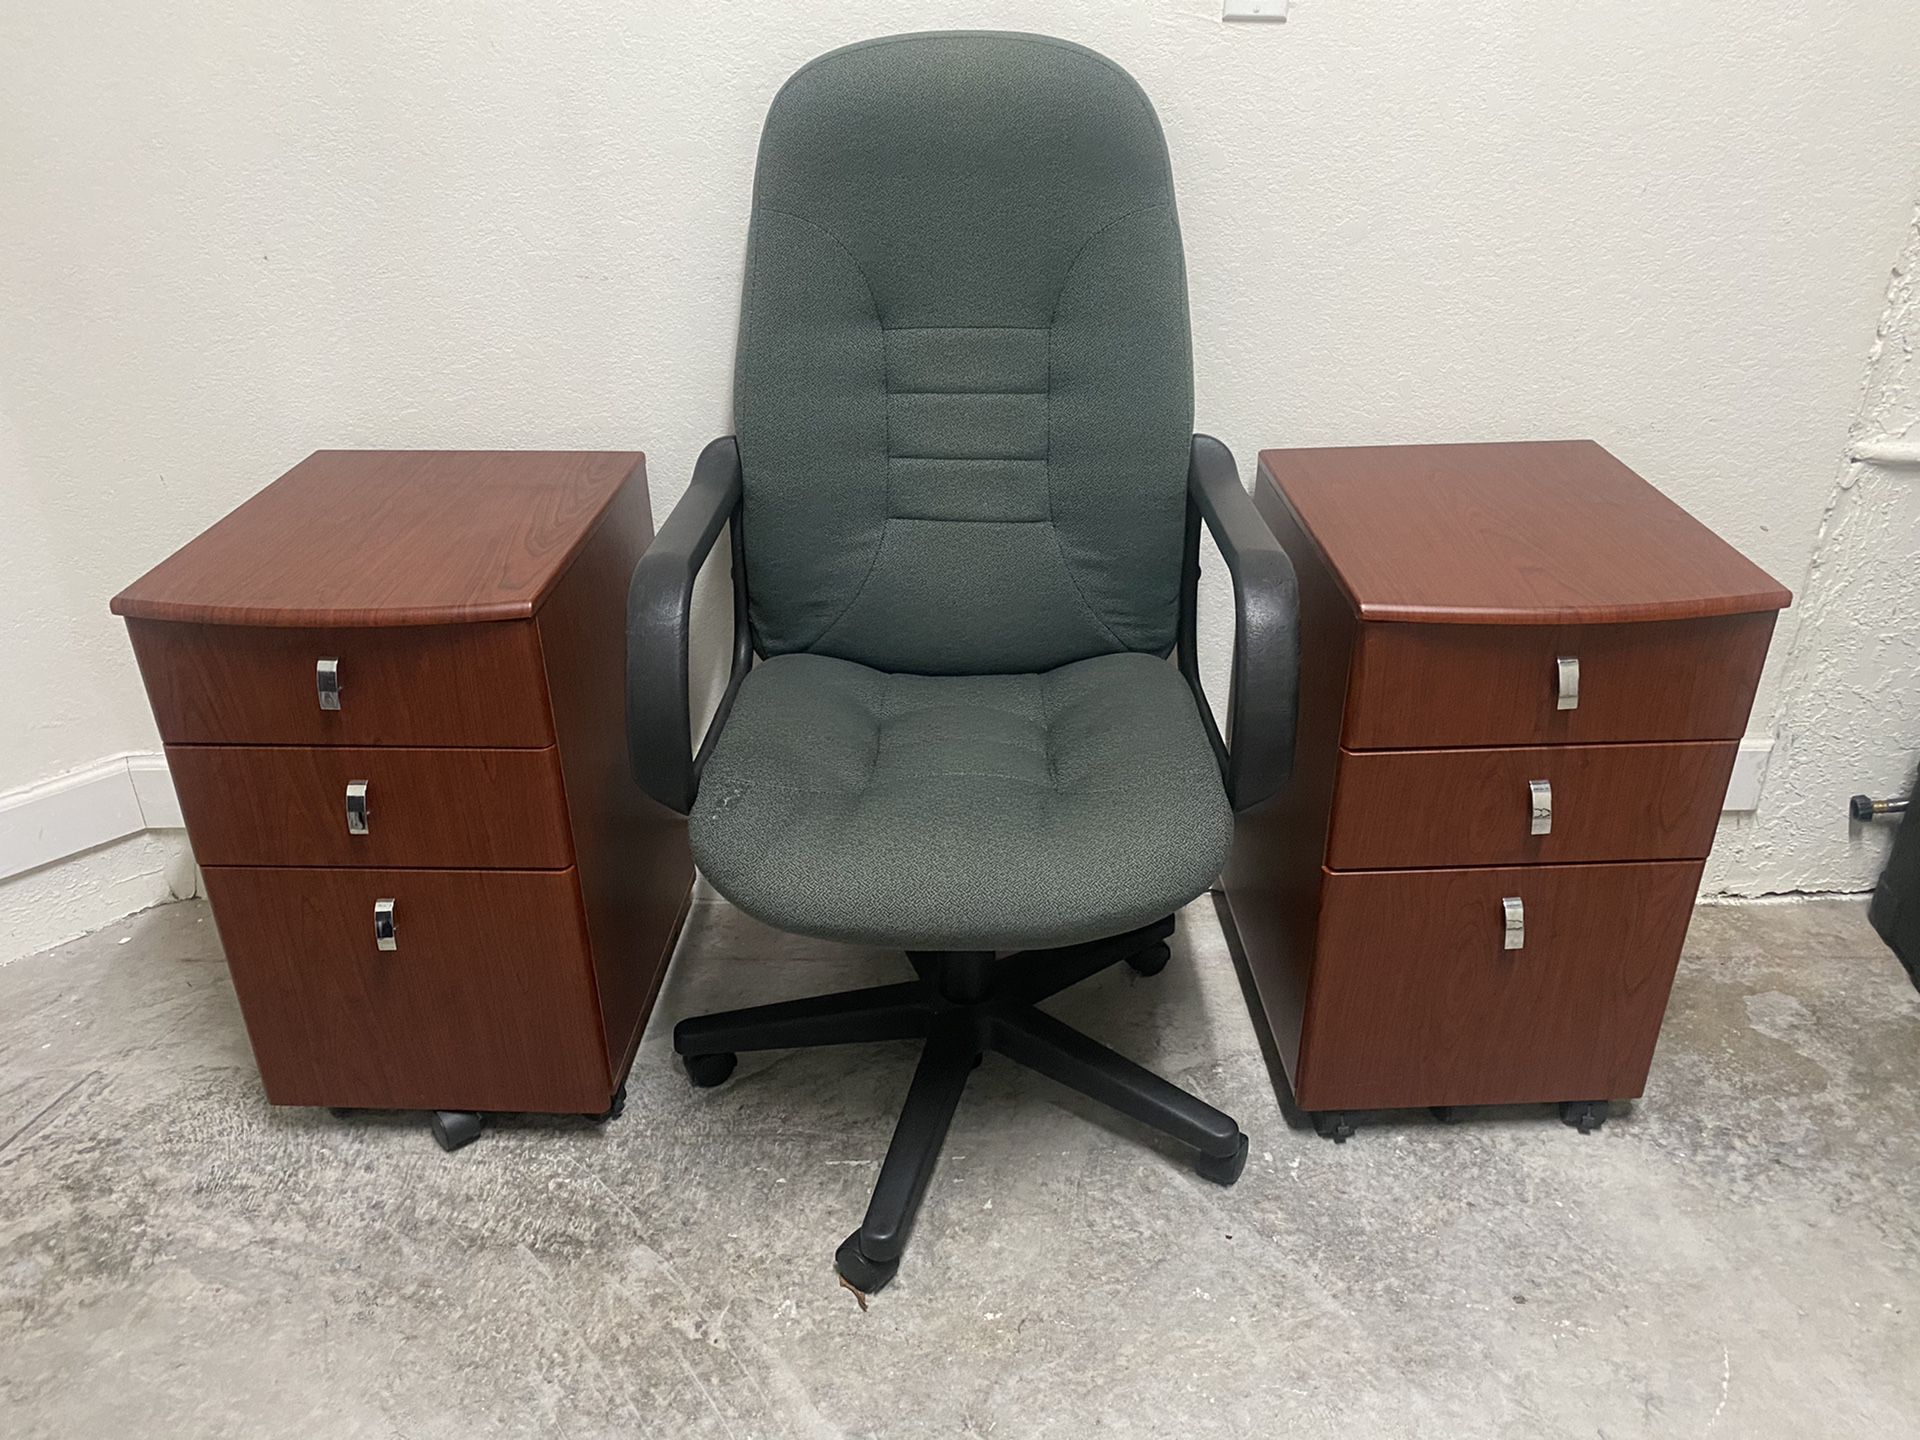 Combo: 2 Portable File Cabinets + 1 Chair